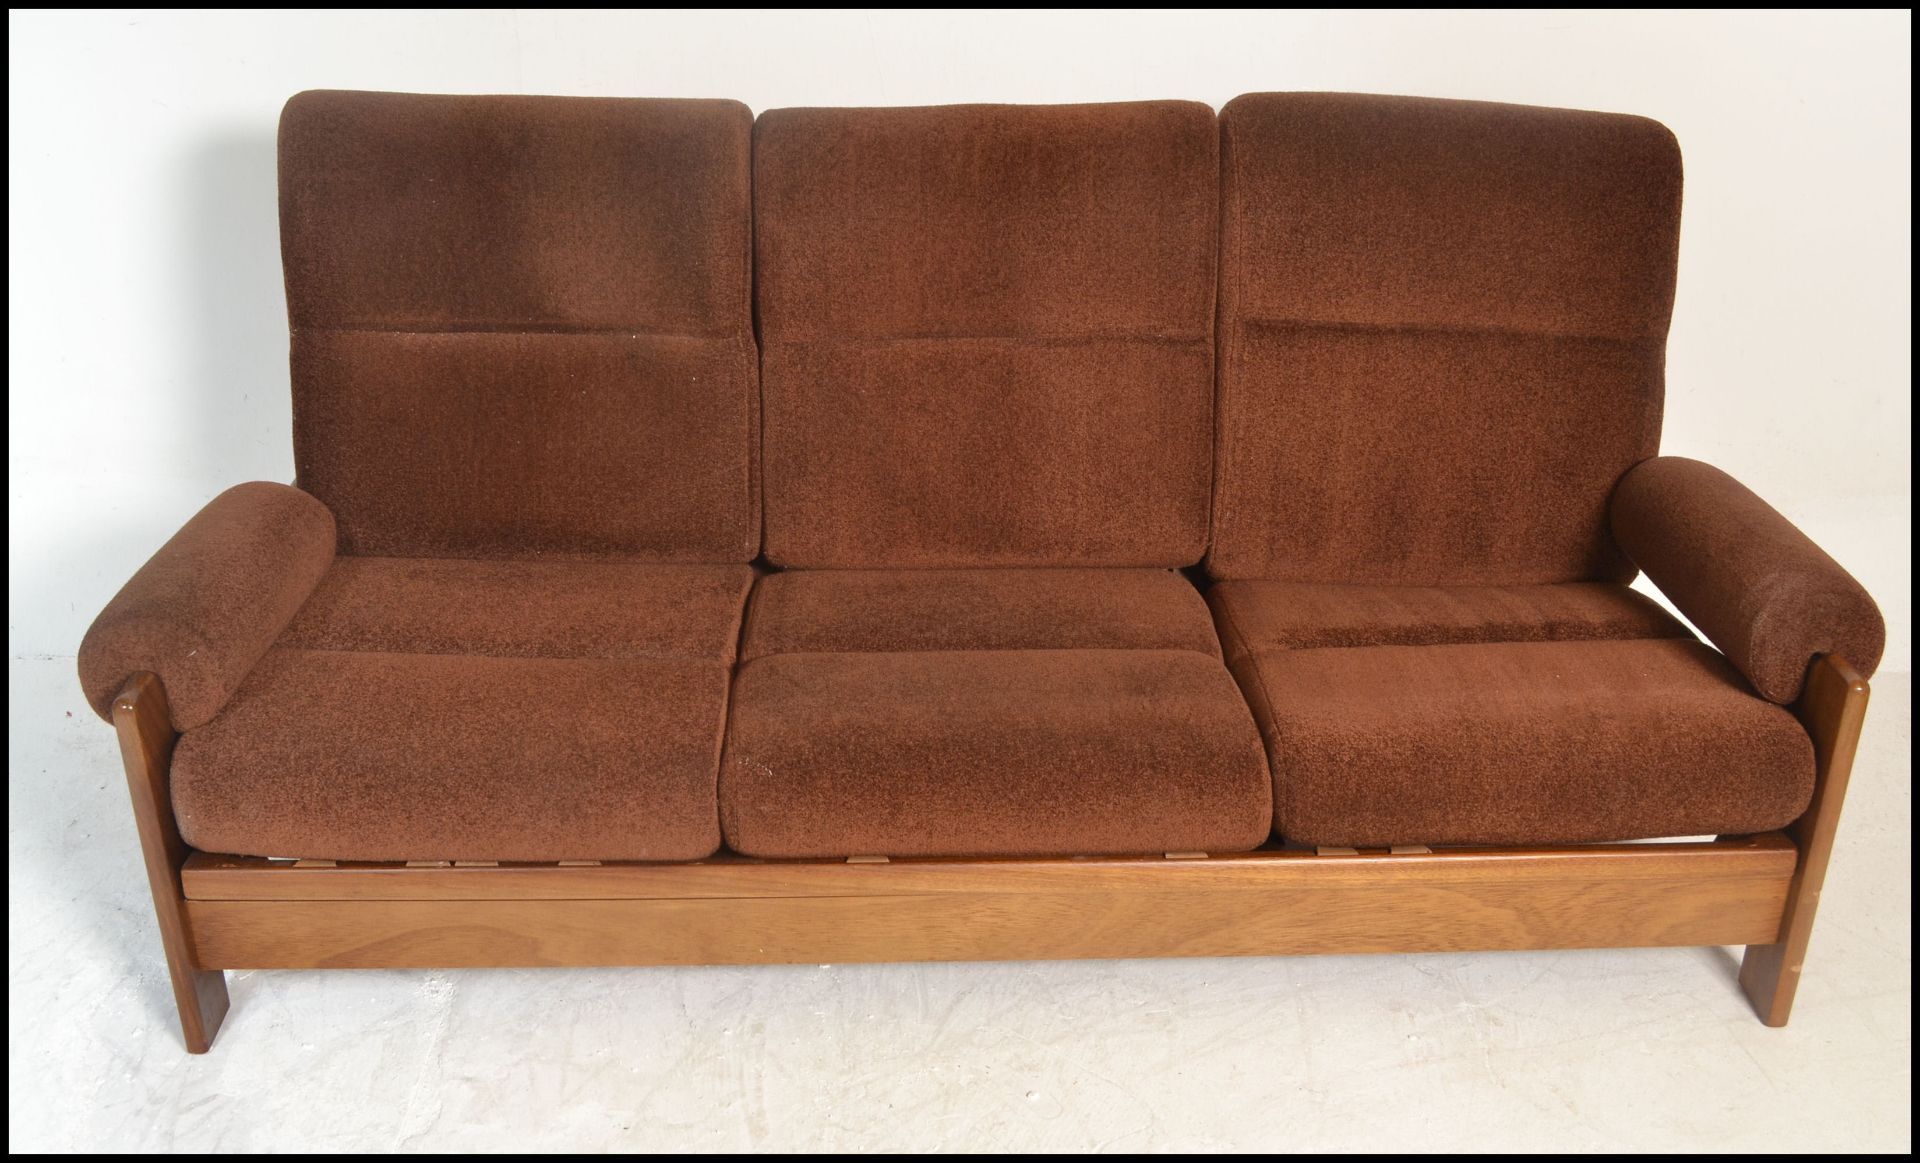 A retro 1960's Danish inspired teak wood day bed sofa. The turned legs supporting a fold down bed - Bild 4 aus 7